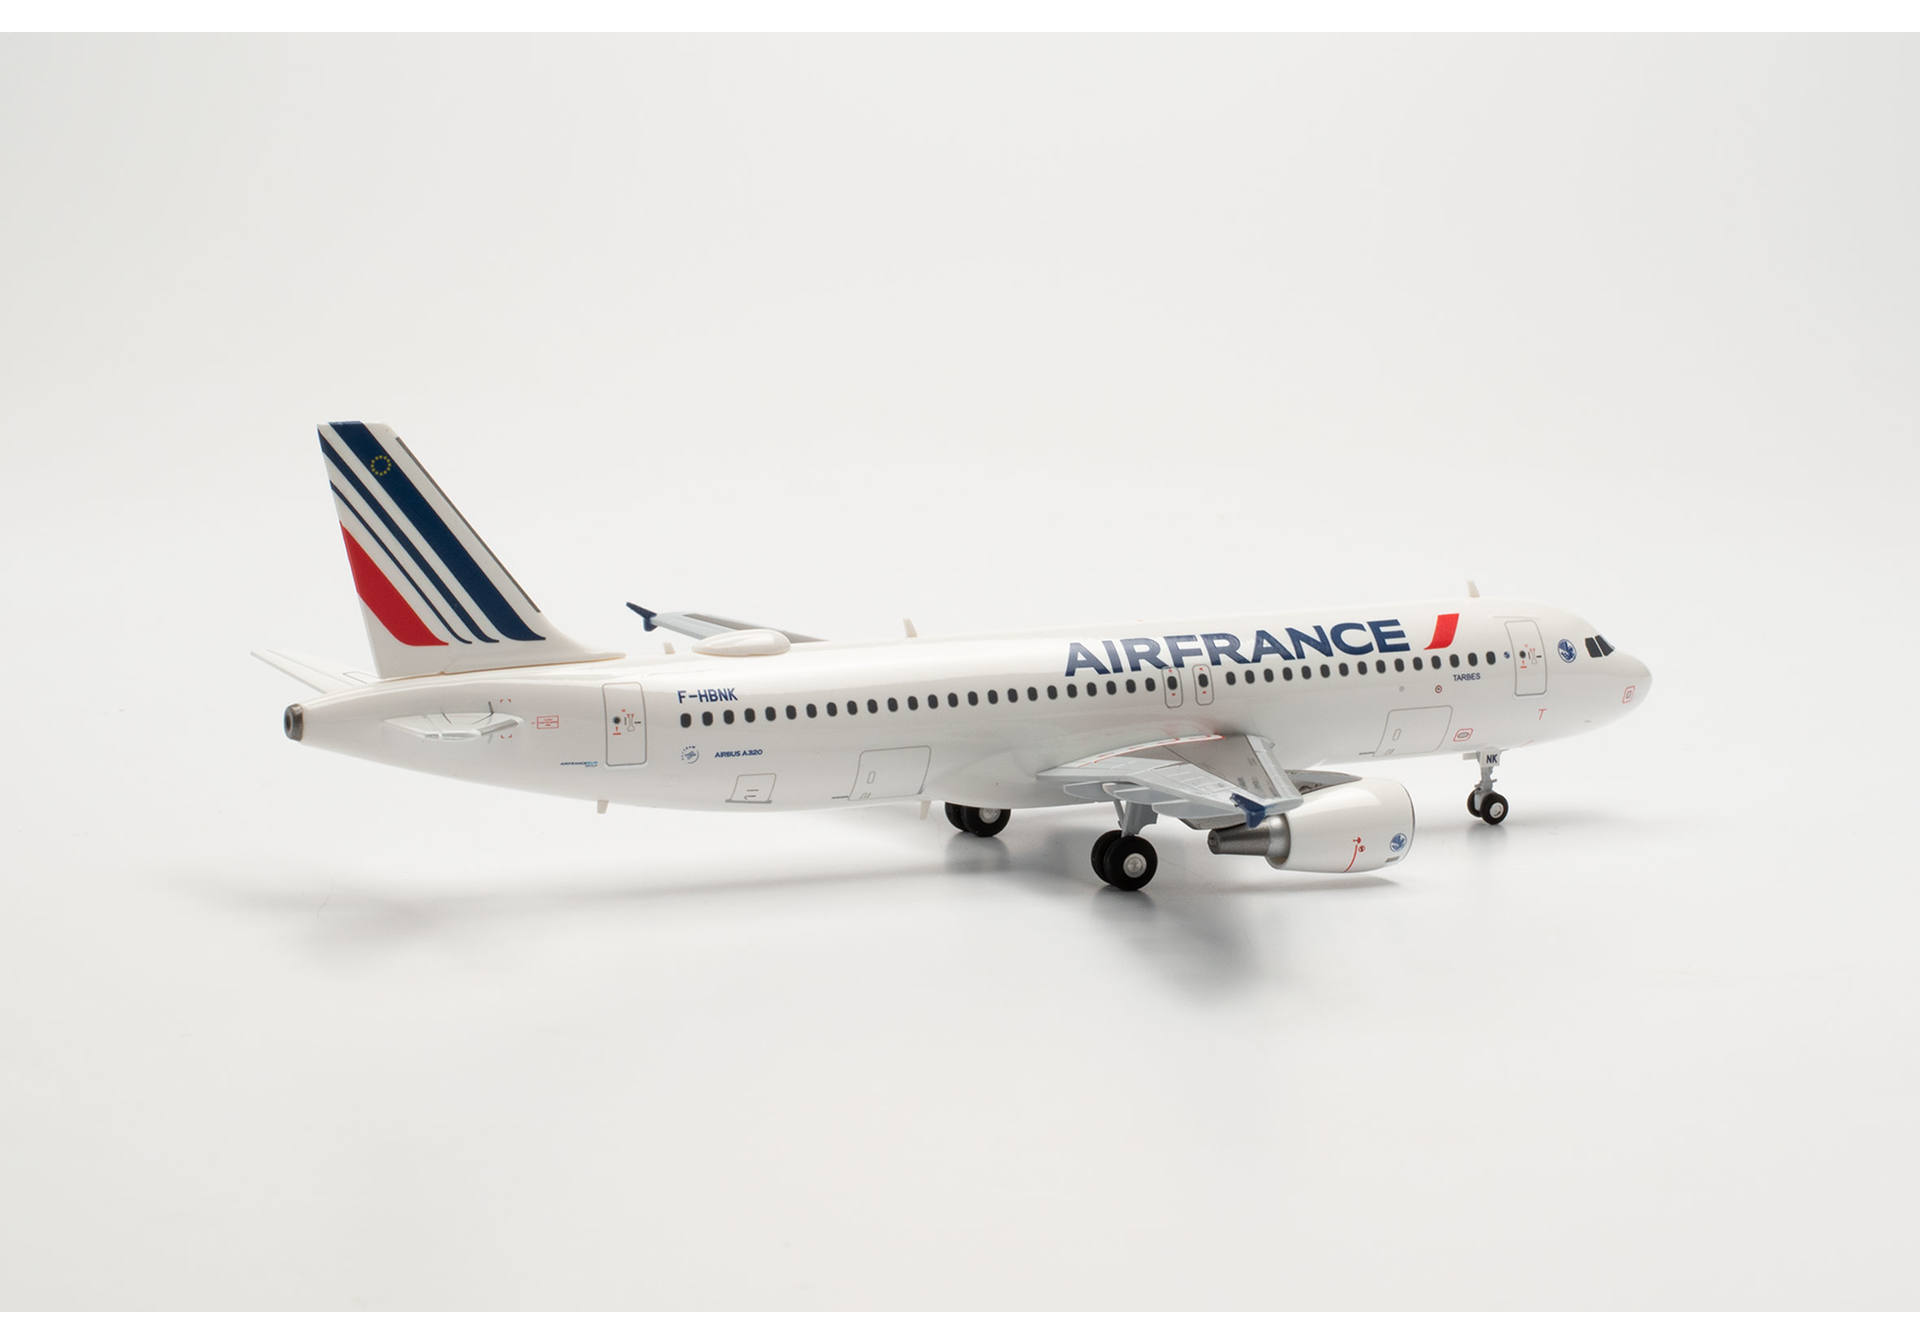 Air France Airbus A320 – new 2021 livery – F-HBNK “Tarbes”